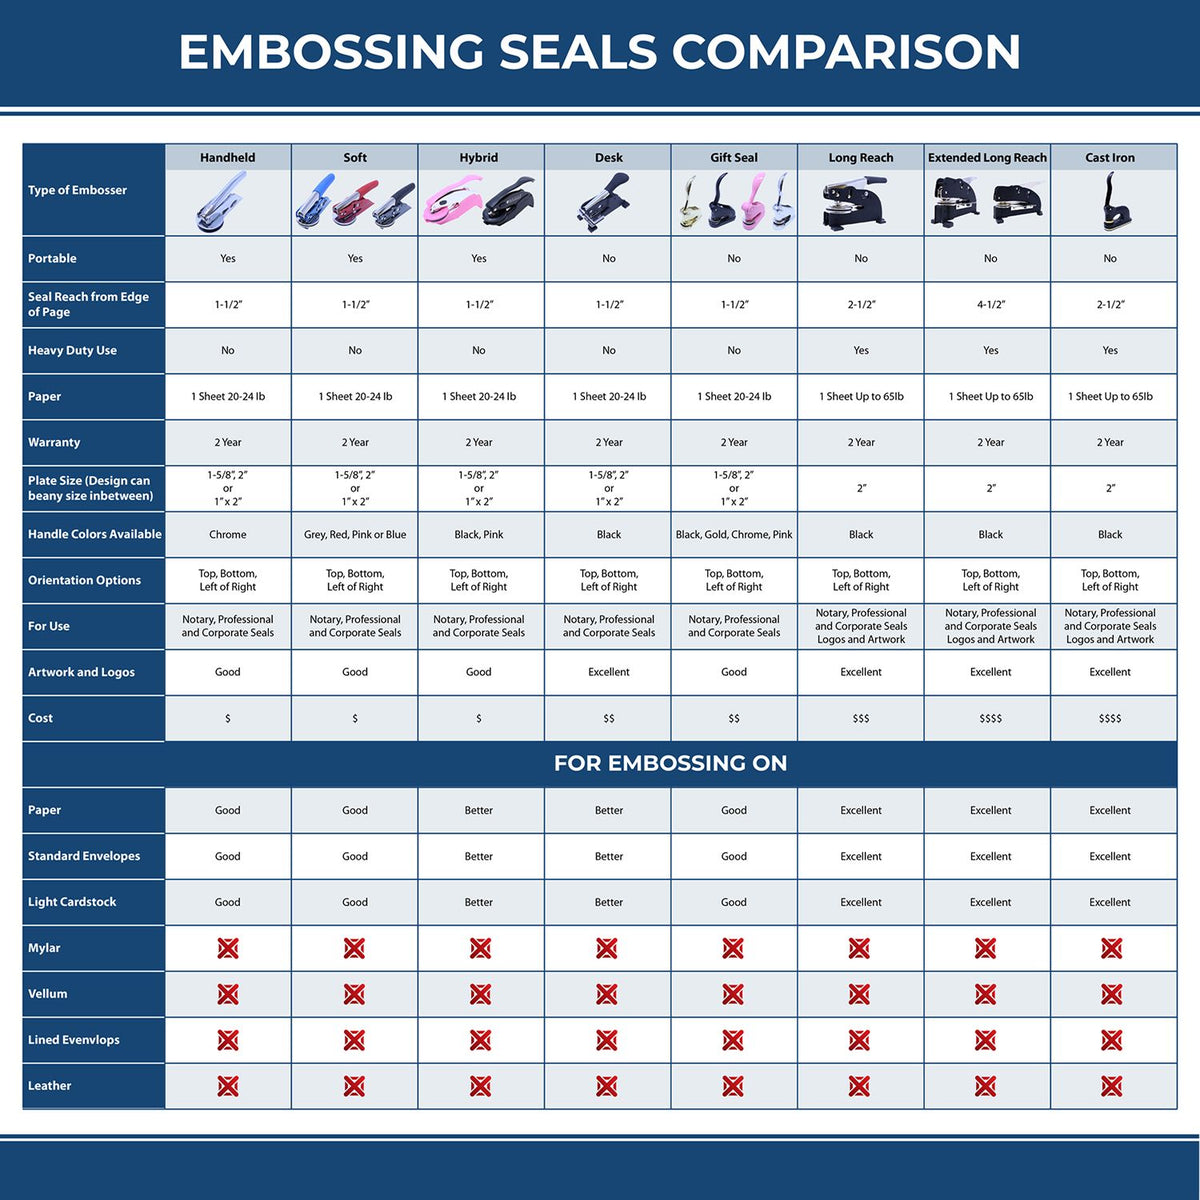 A comparison chart for the different types of mount models available for the State of Mississippi Long Reach Architectural Embossing Seal.